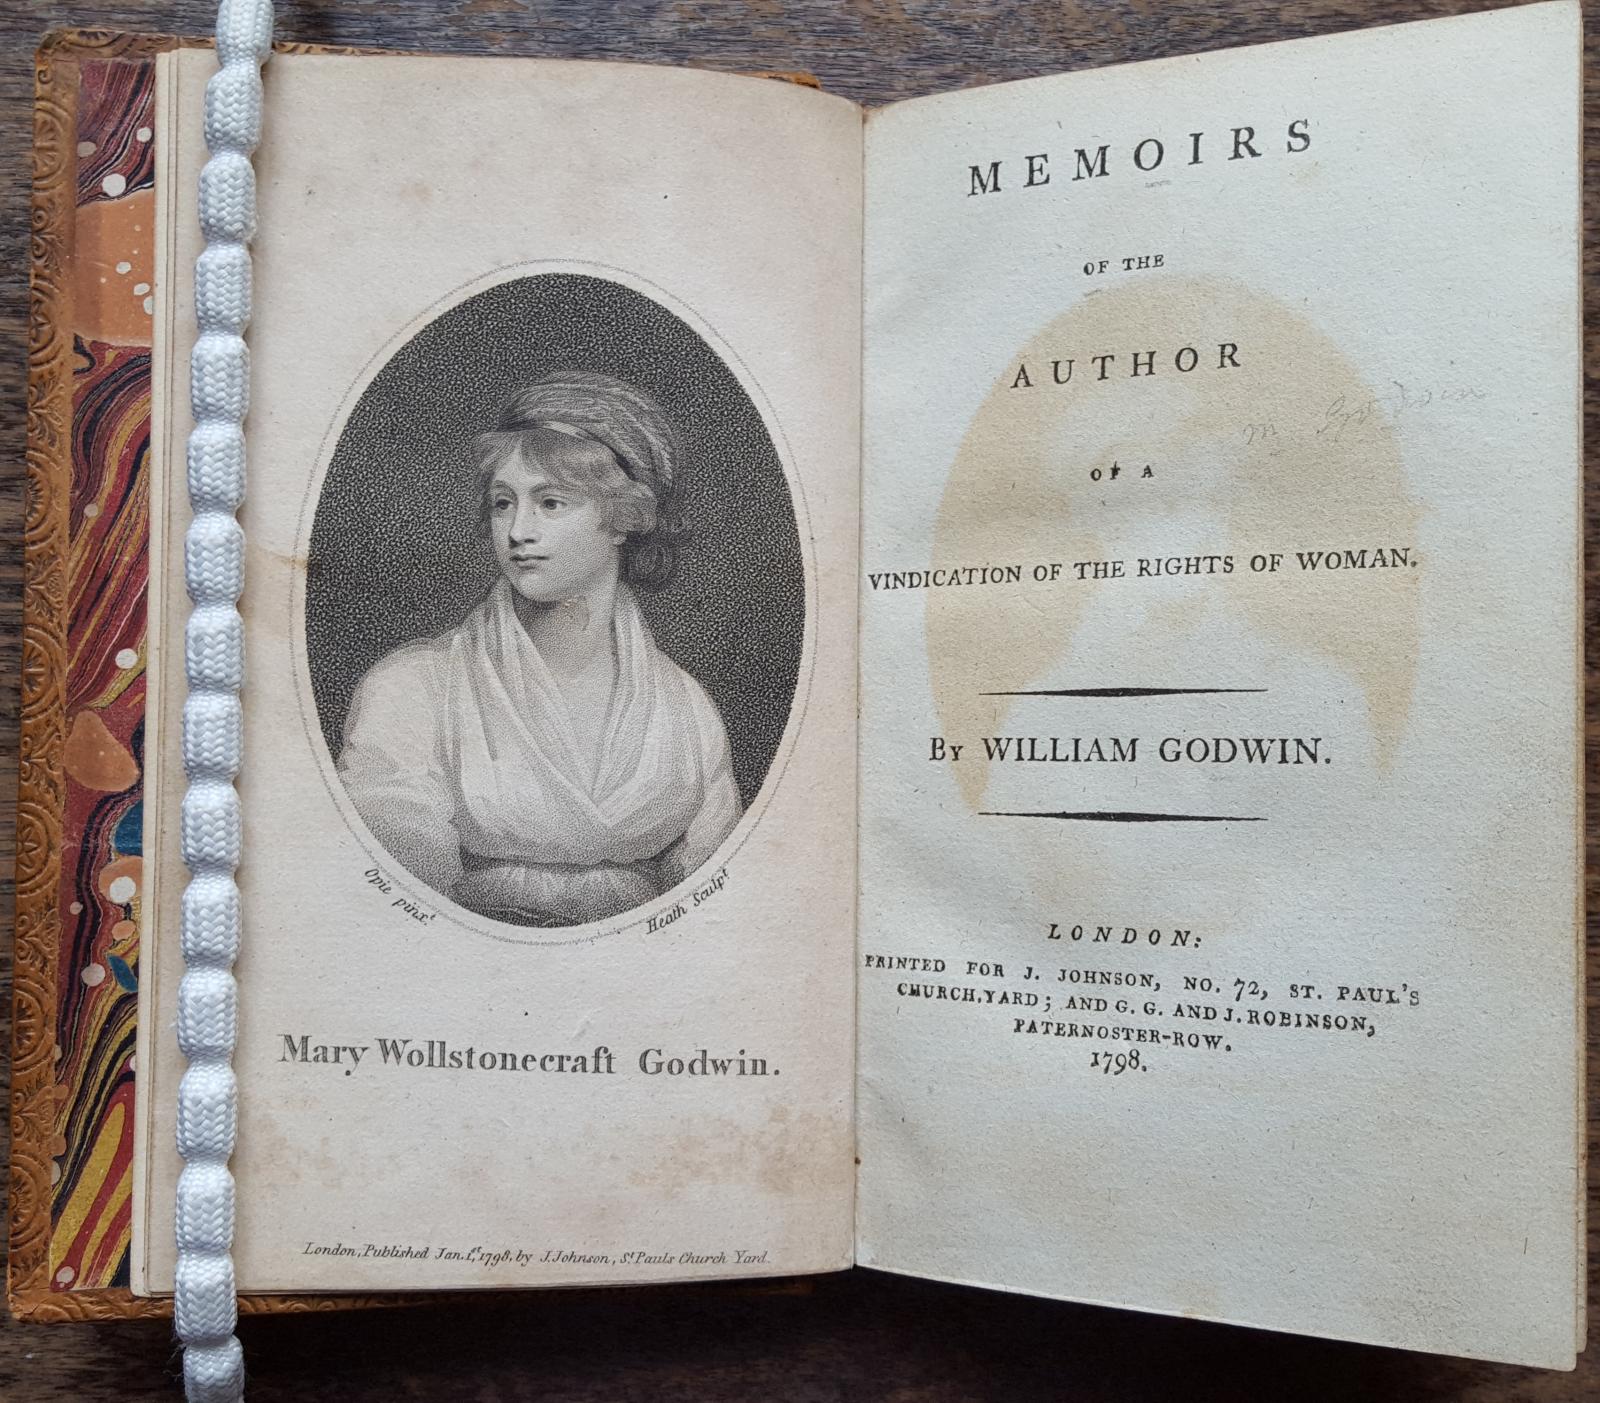 The LMH copy of Mary Wollstonecraft's biography